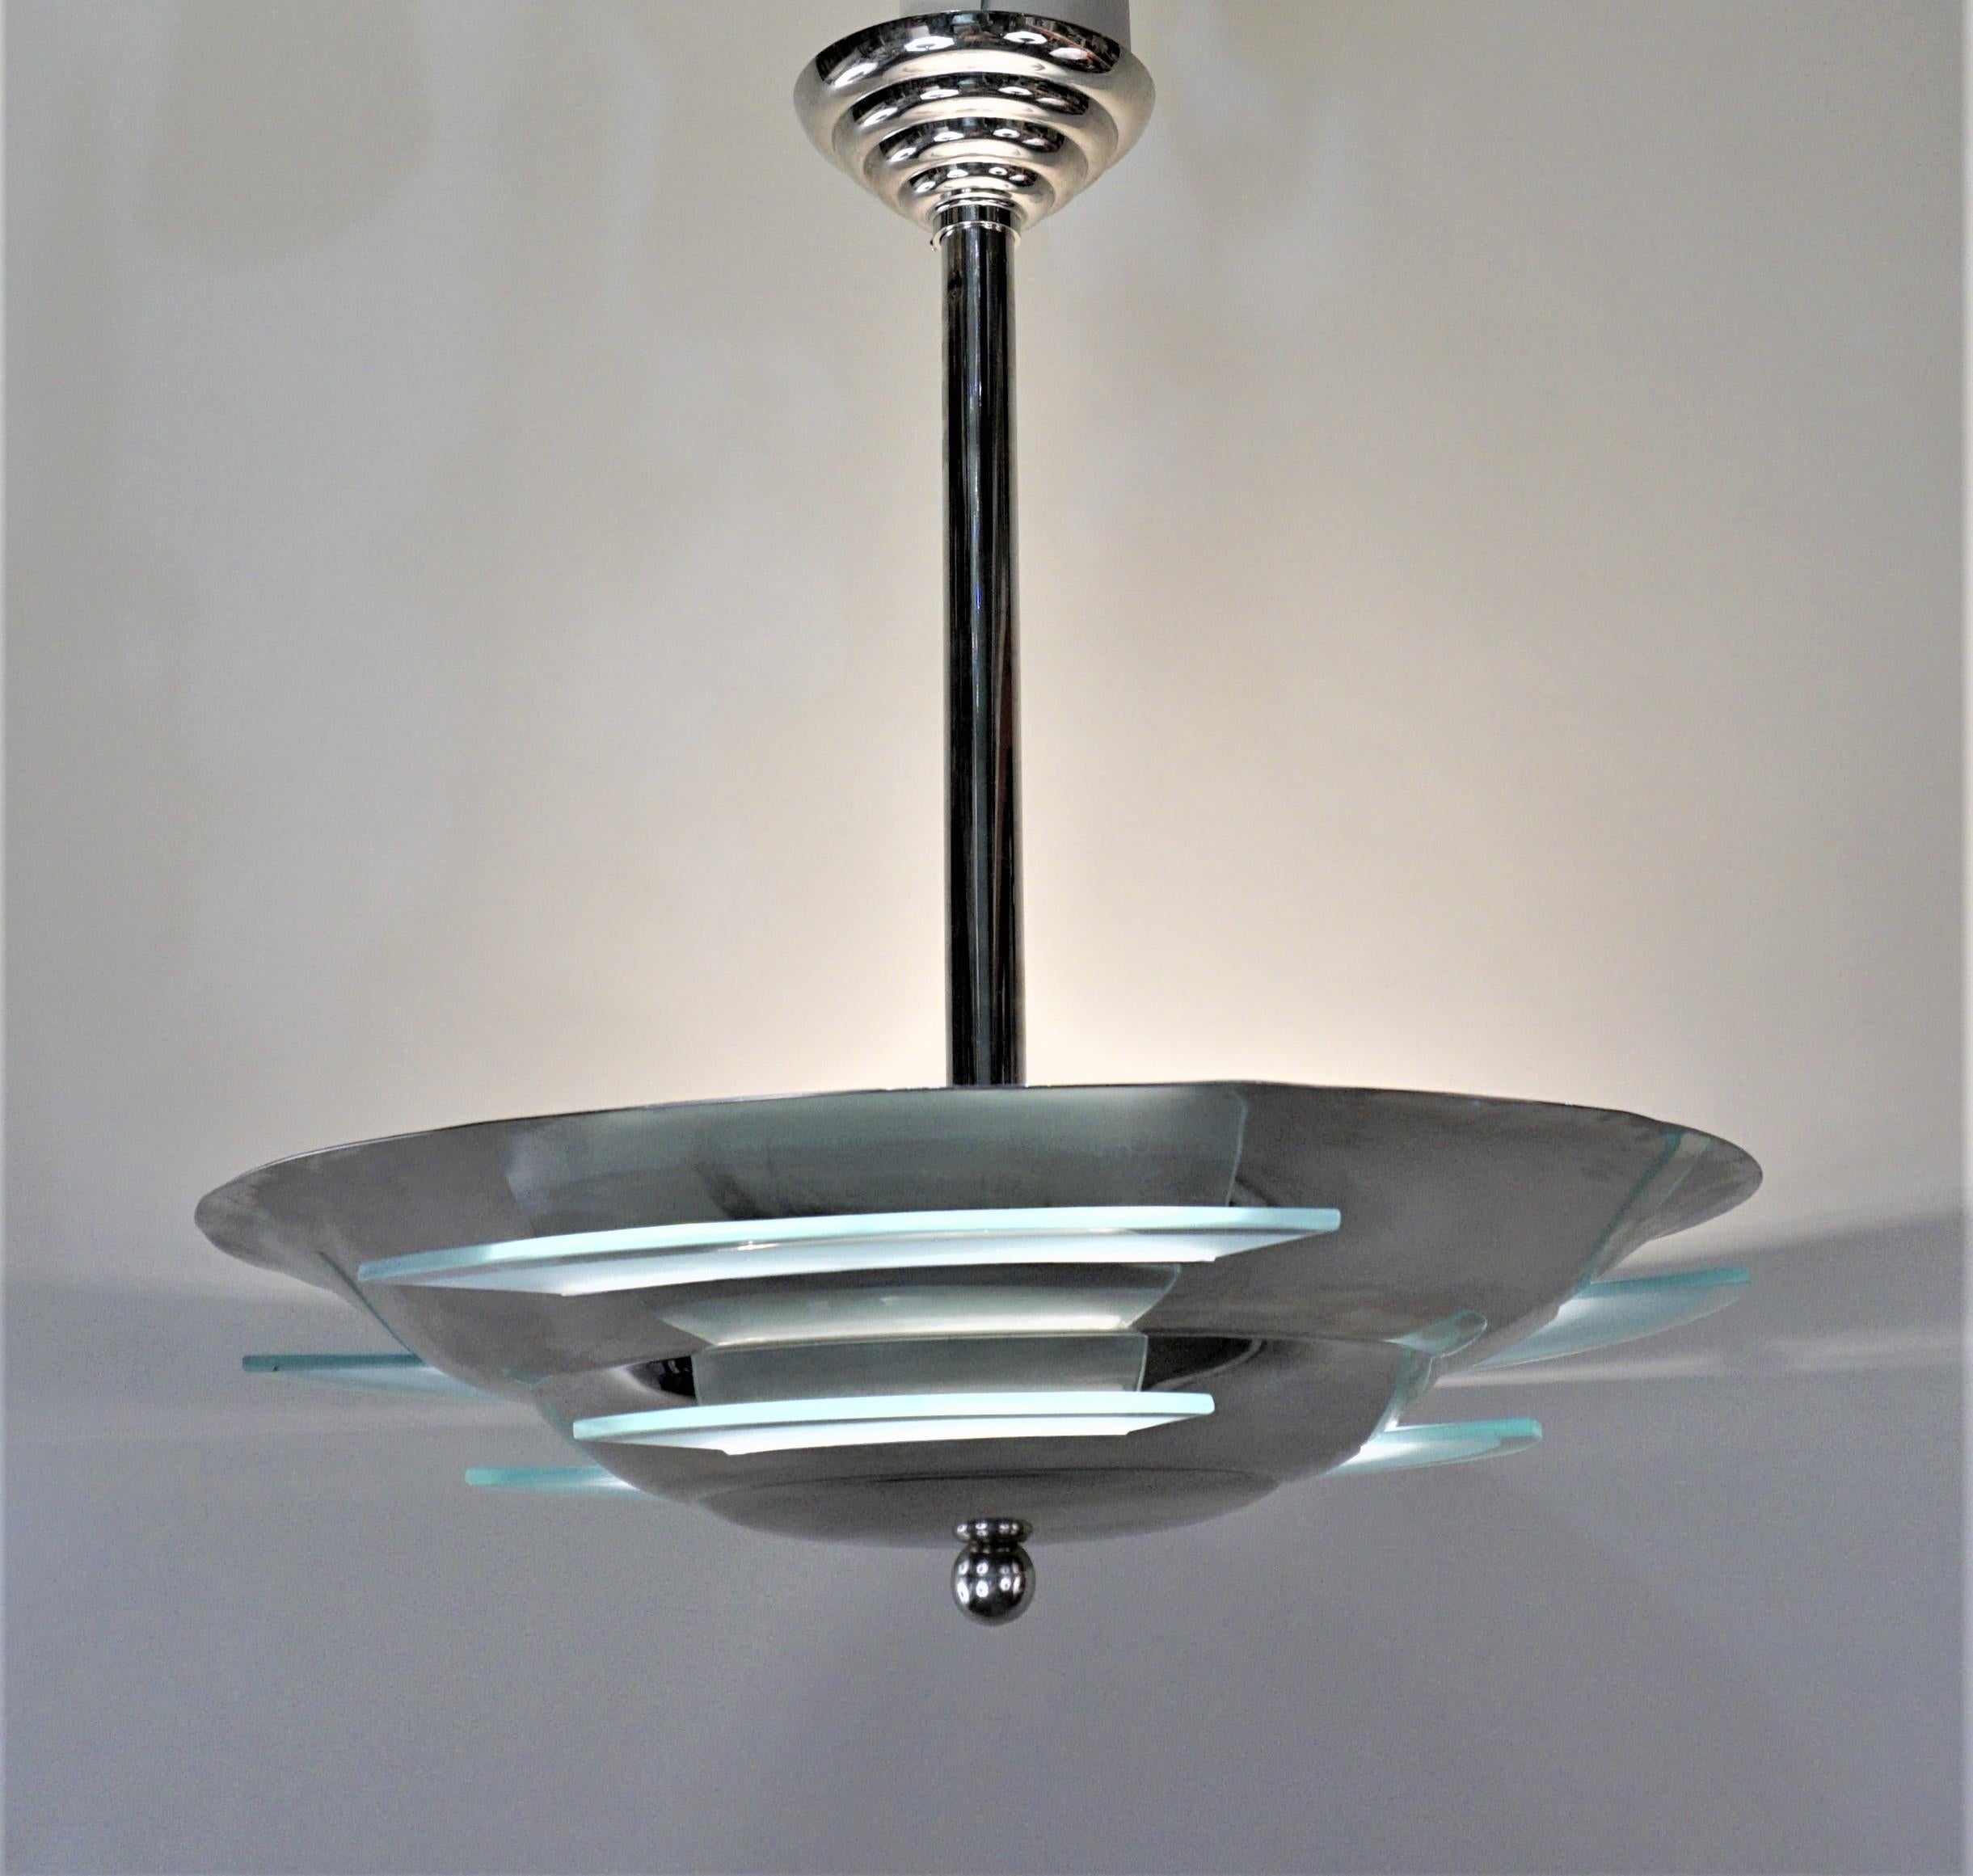 French Art Deco modern style nickel on bronze with clear and frost glass chandelier.
Total of 9 lights 60 watt max each.